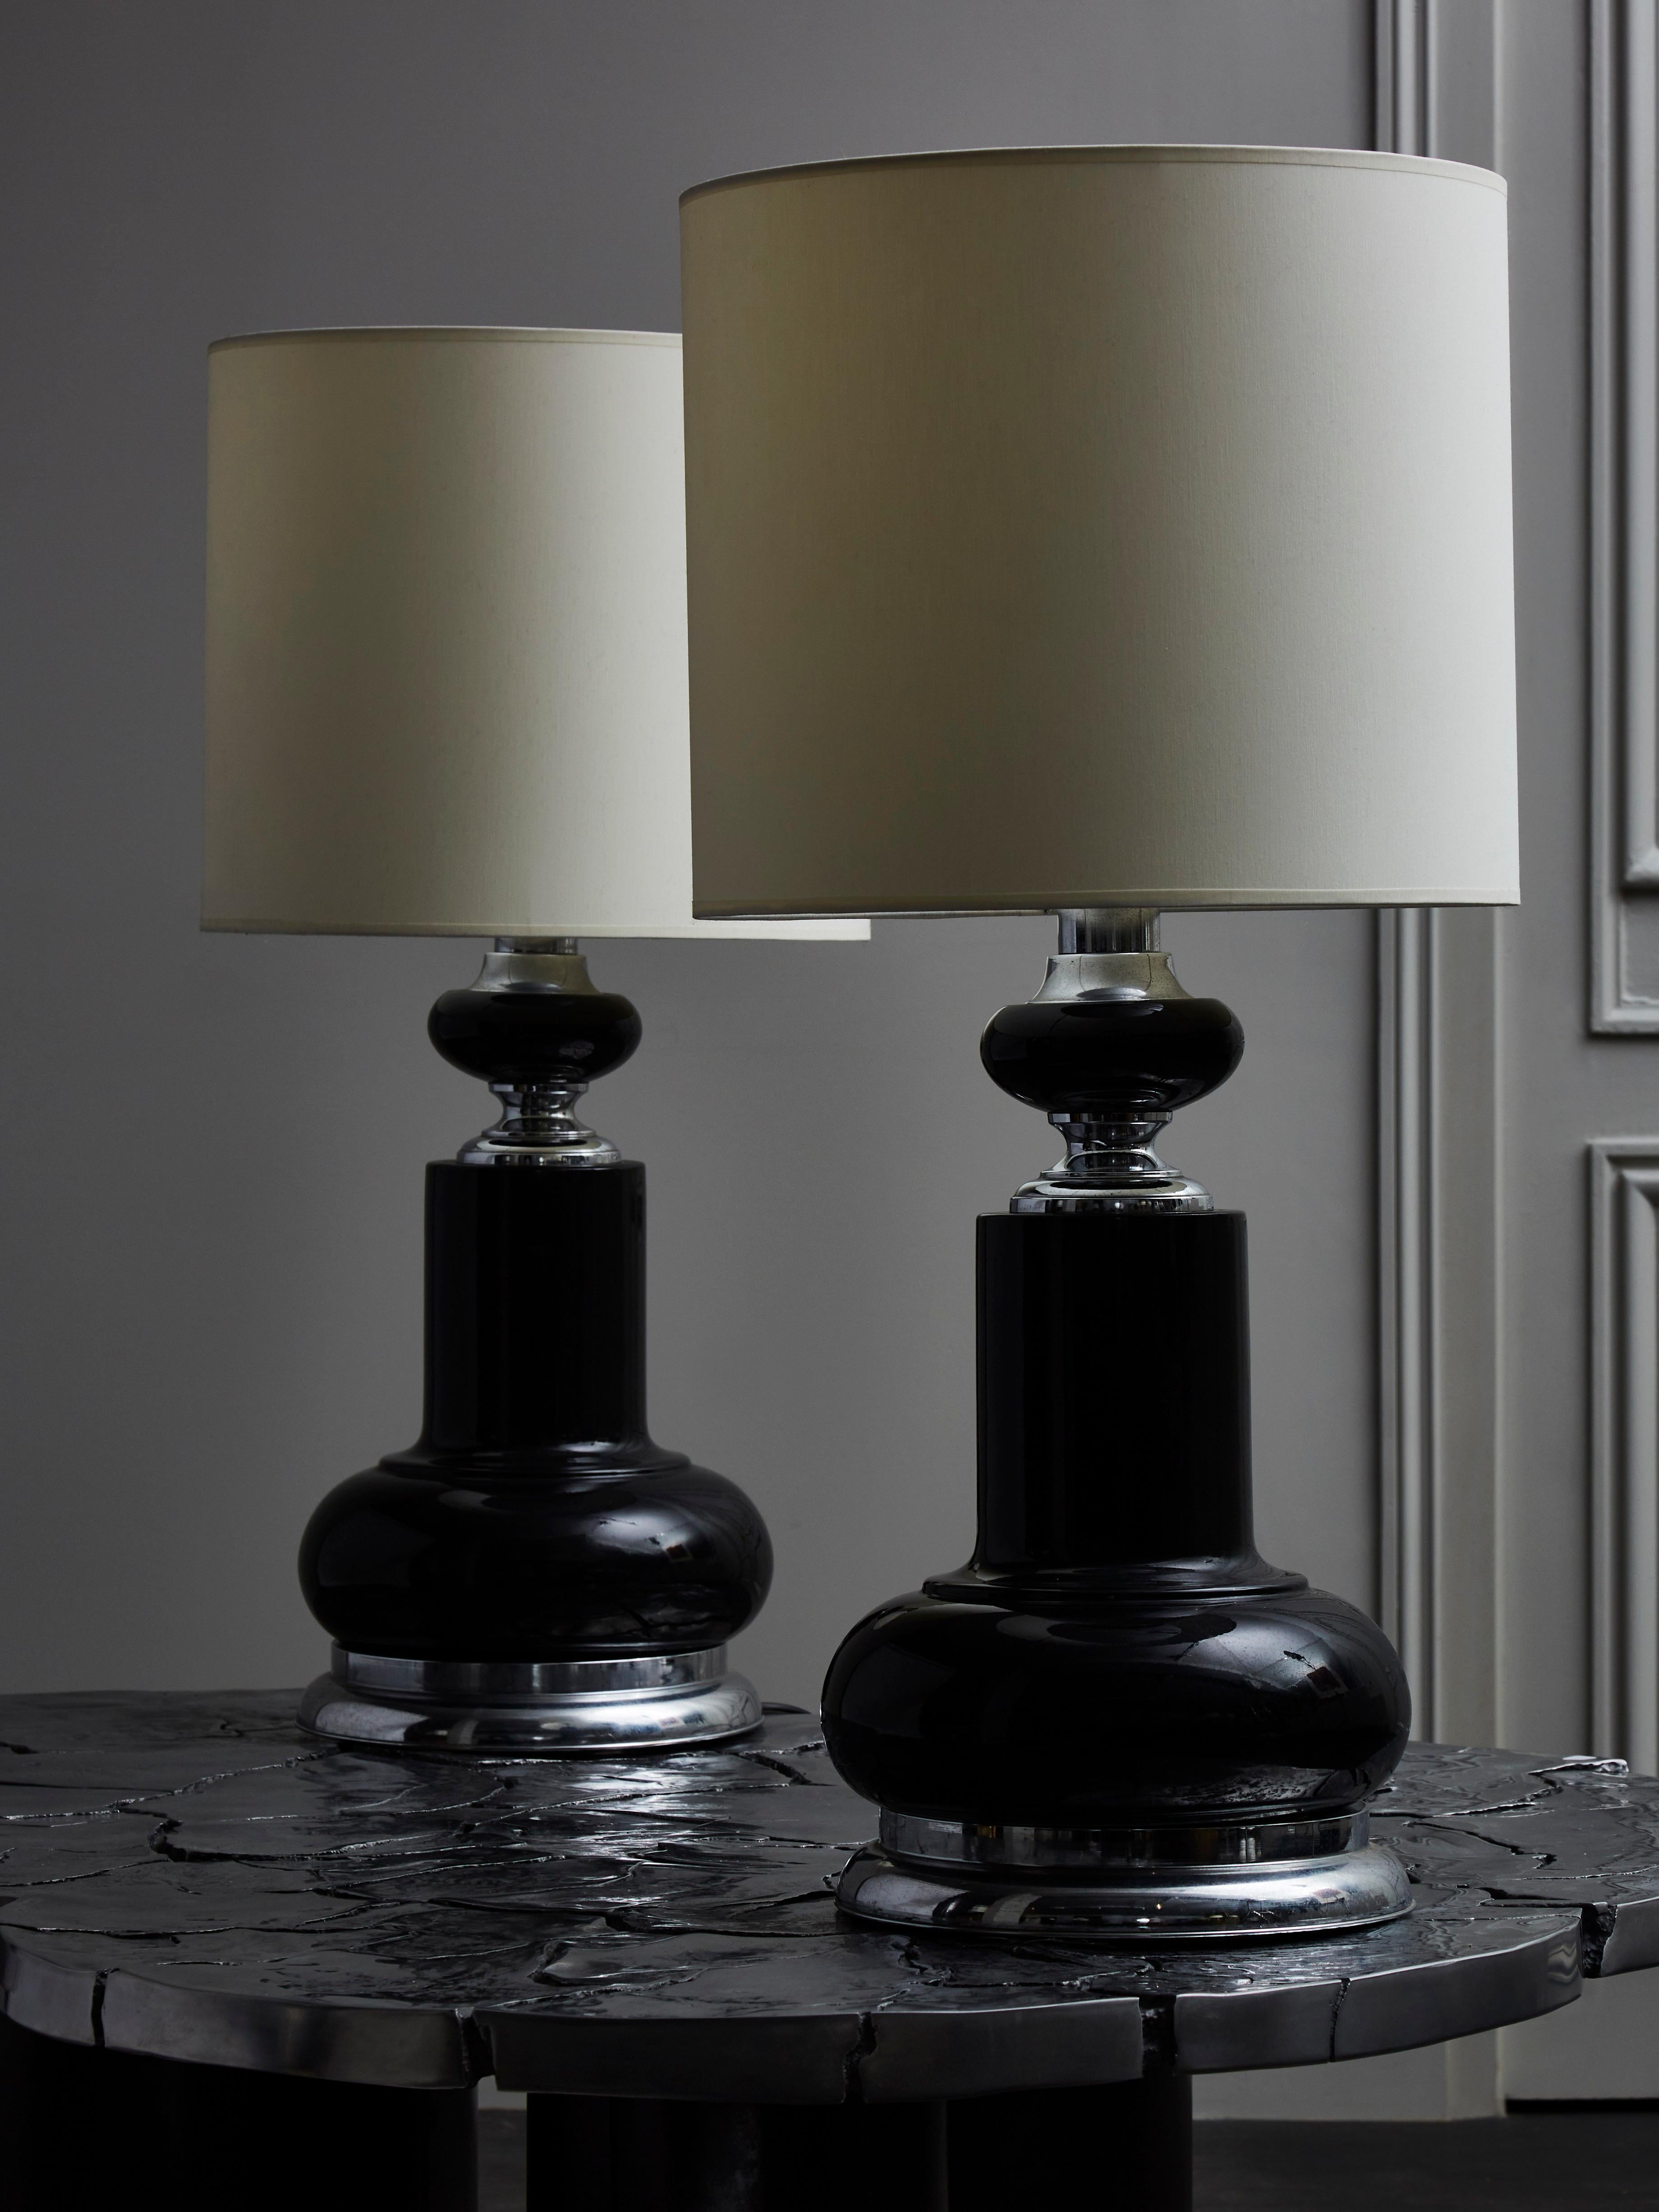 Pair of big table lamps made of black enameled metal with polished details such as the feet and necks of the lamps.
 
  